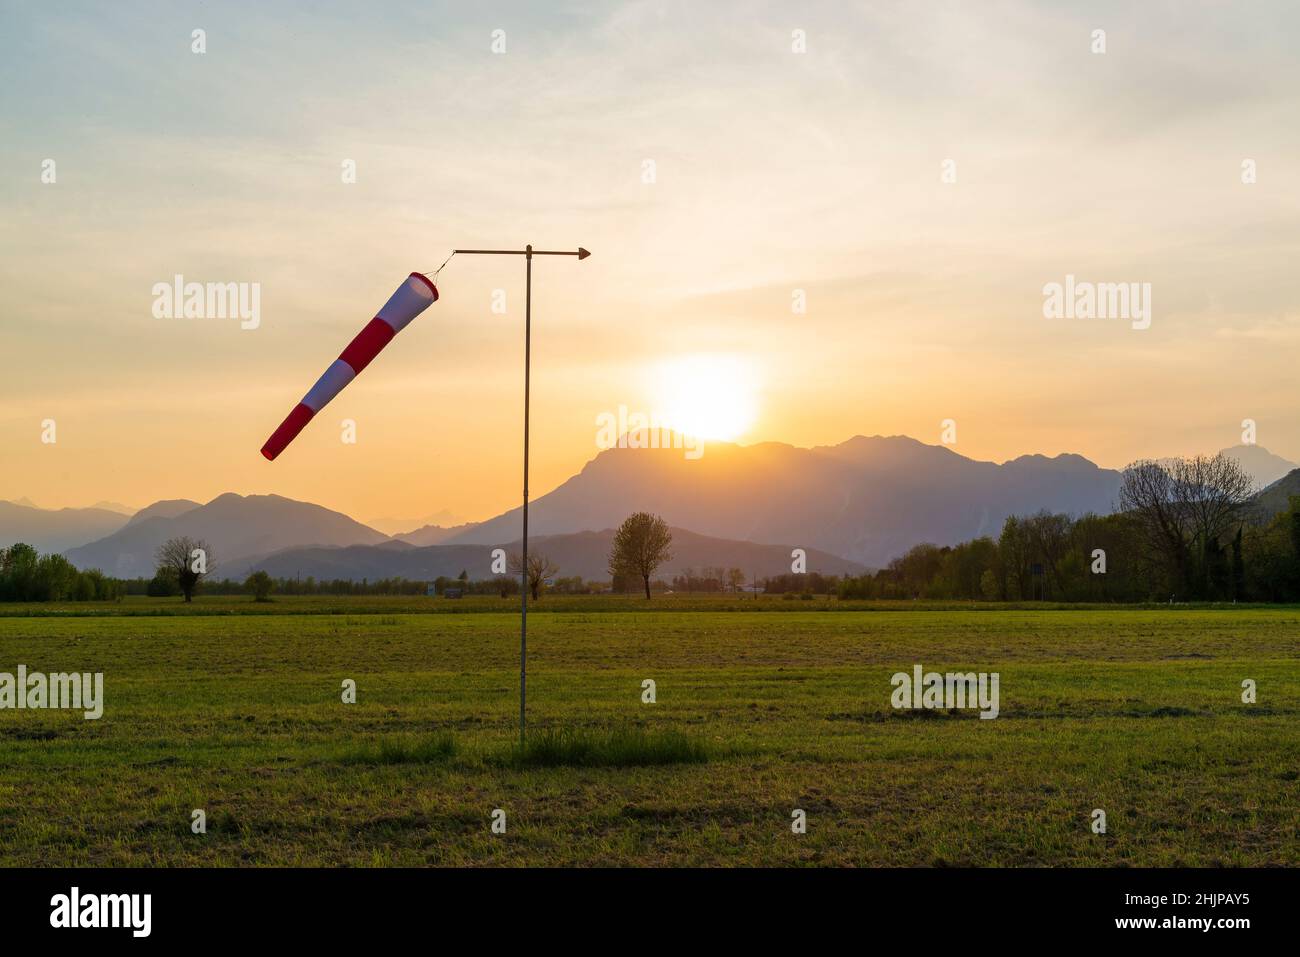 Windsock pole on the small airfield in the mountains. Sunset at the airfield. Stock Photo